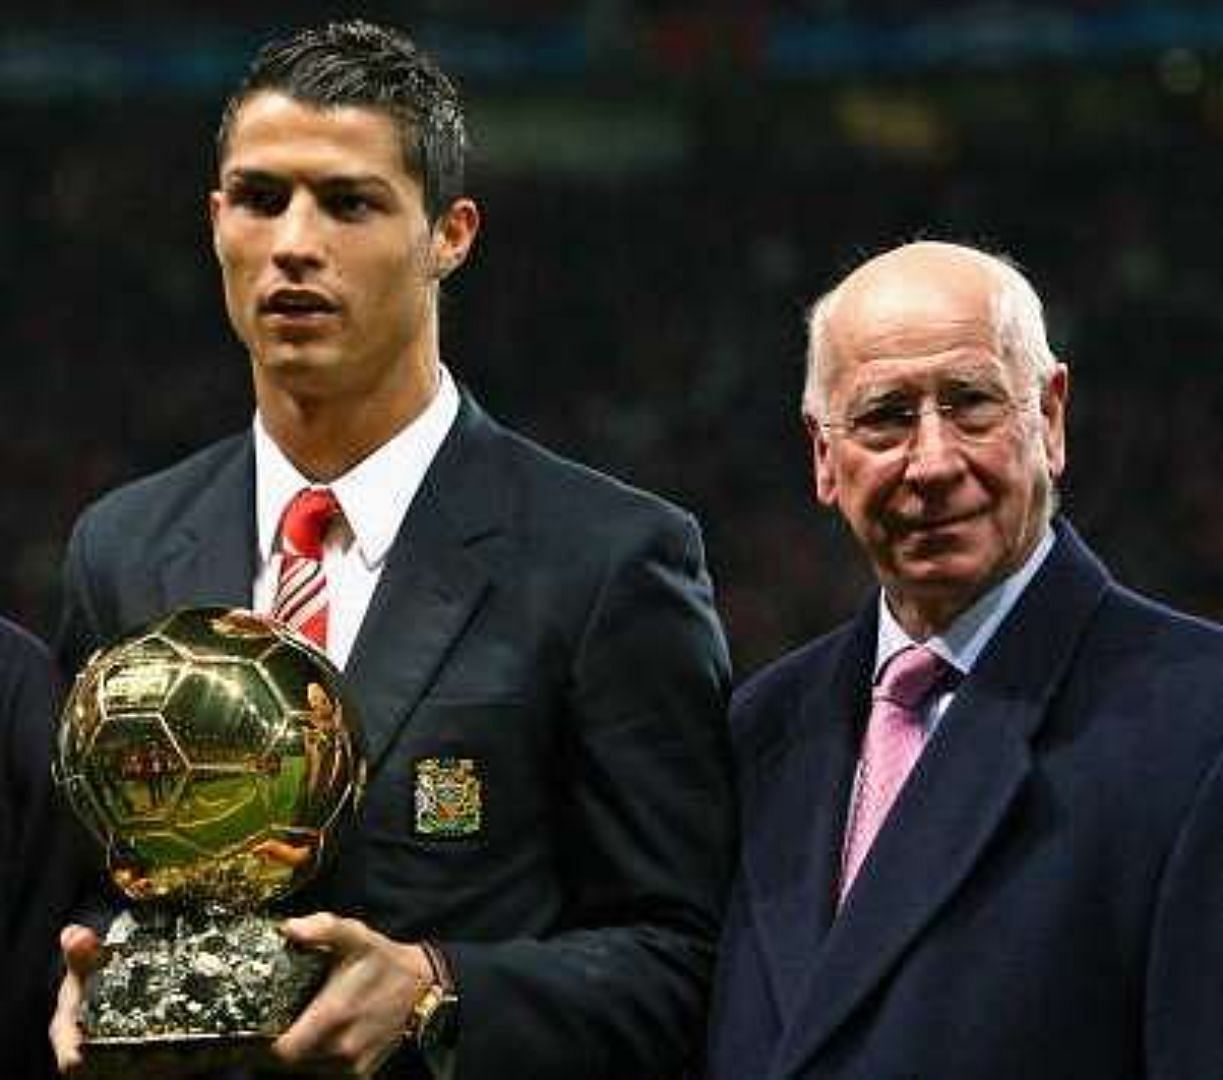 Sir Bobby Charlton and Ronaldo are icons of Manchester United.